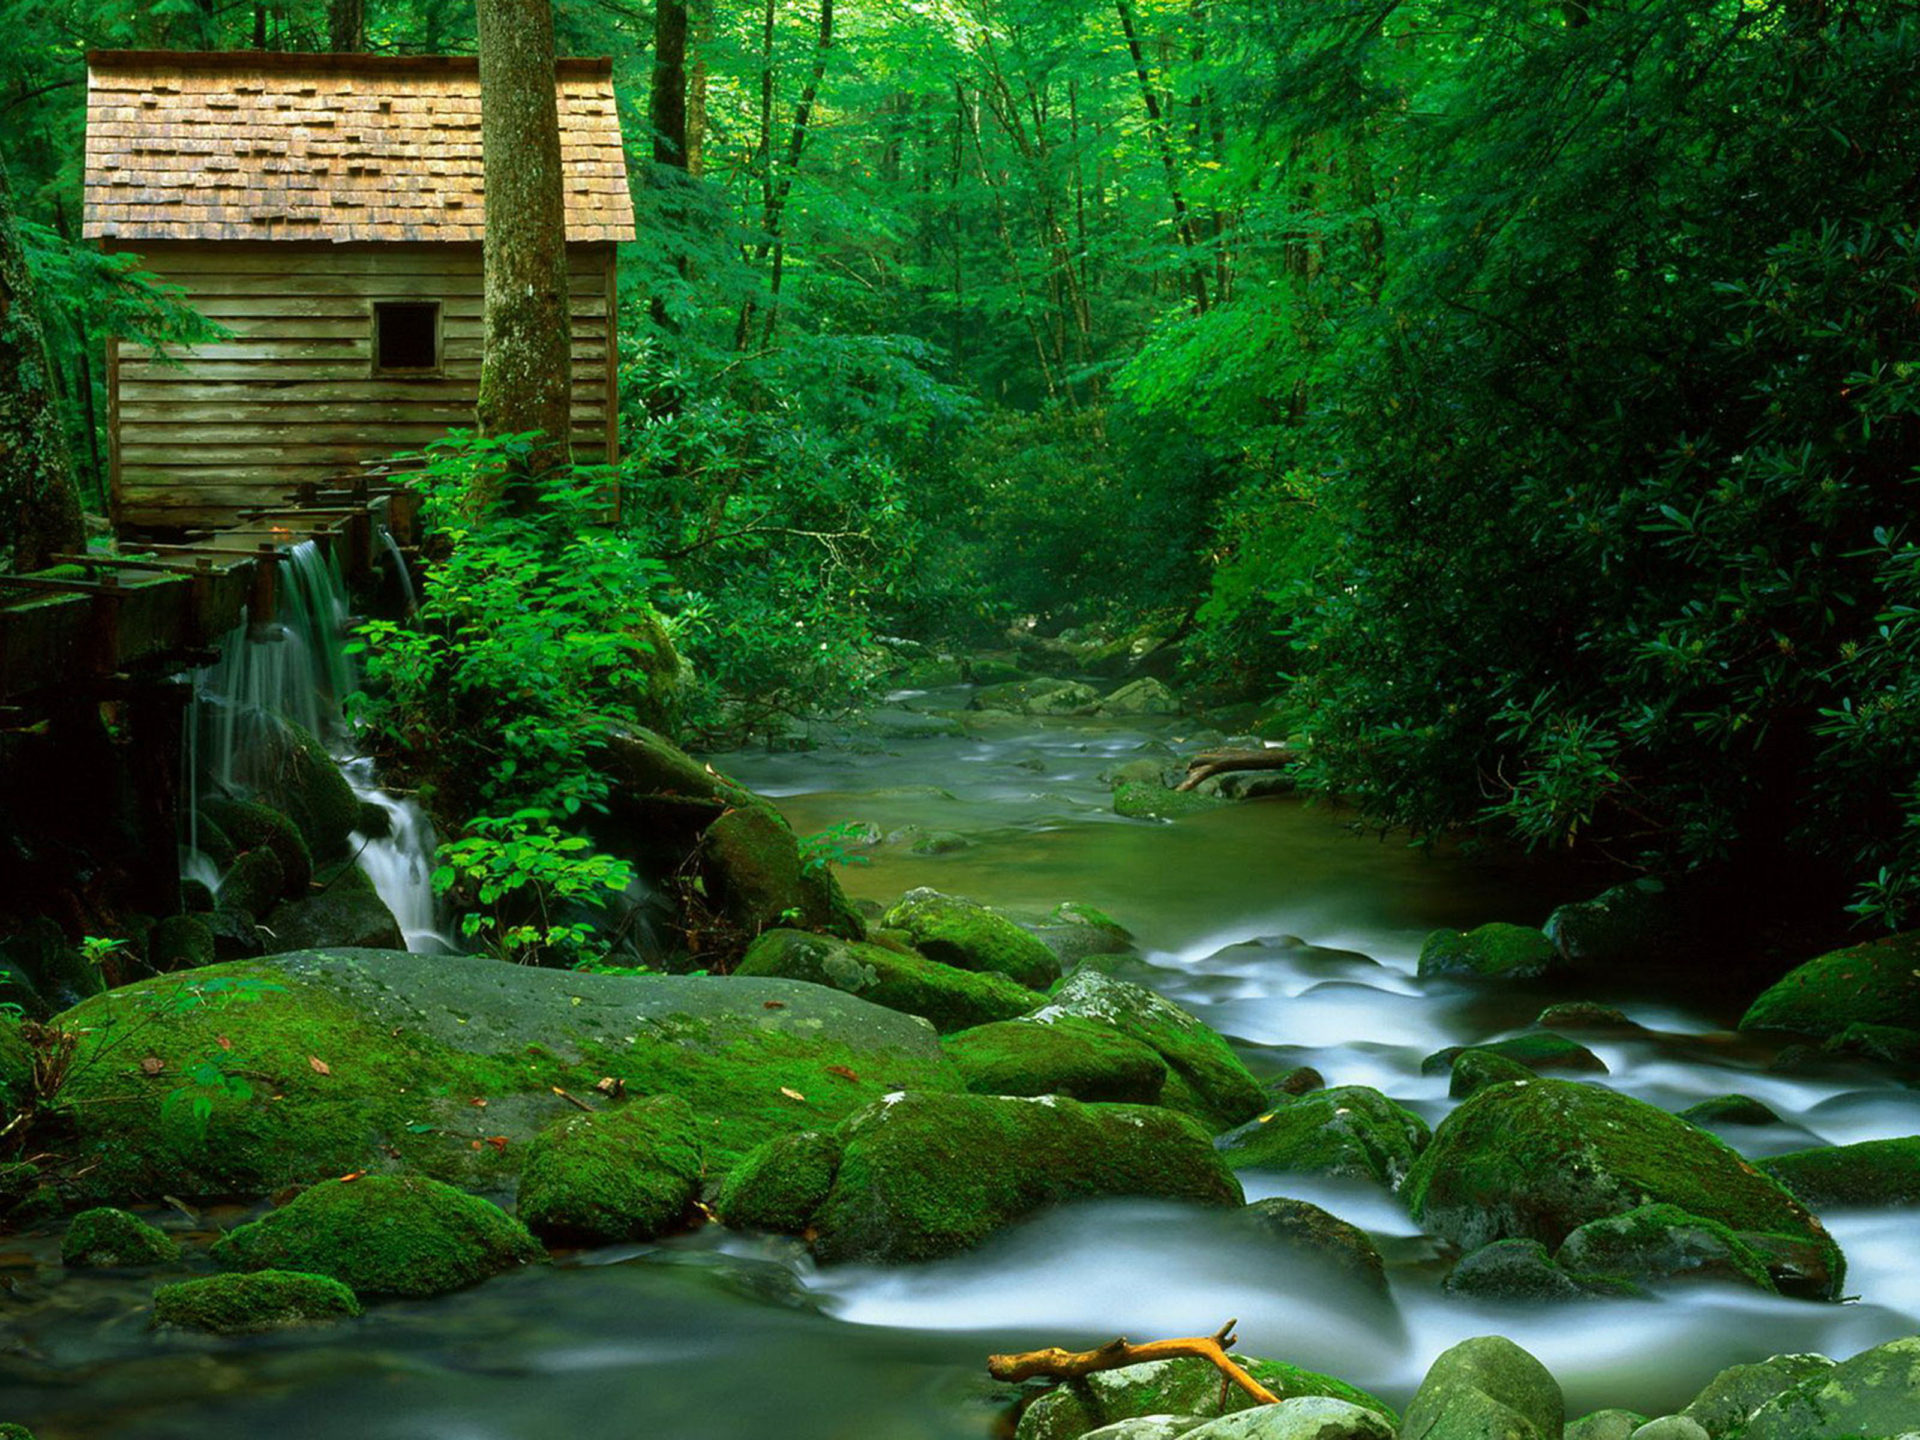 Beauties Of Nature Wooden Water Mountain River With Clear Water Rocks Covered With Green Moss Thick Green Forest With Trees Desktop HD Wallpaper 3840x2400, Wallpaper13.com